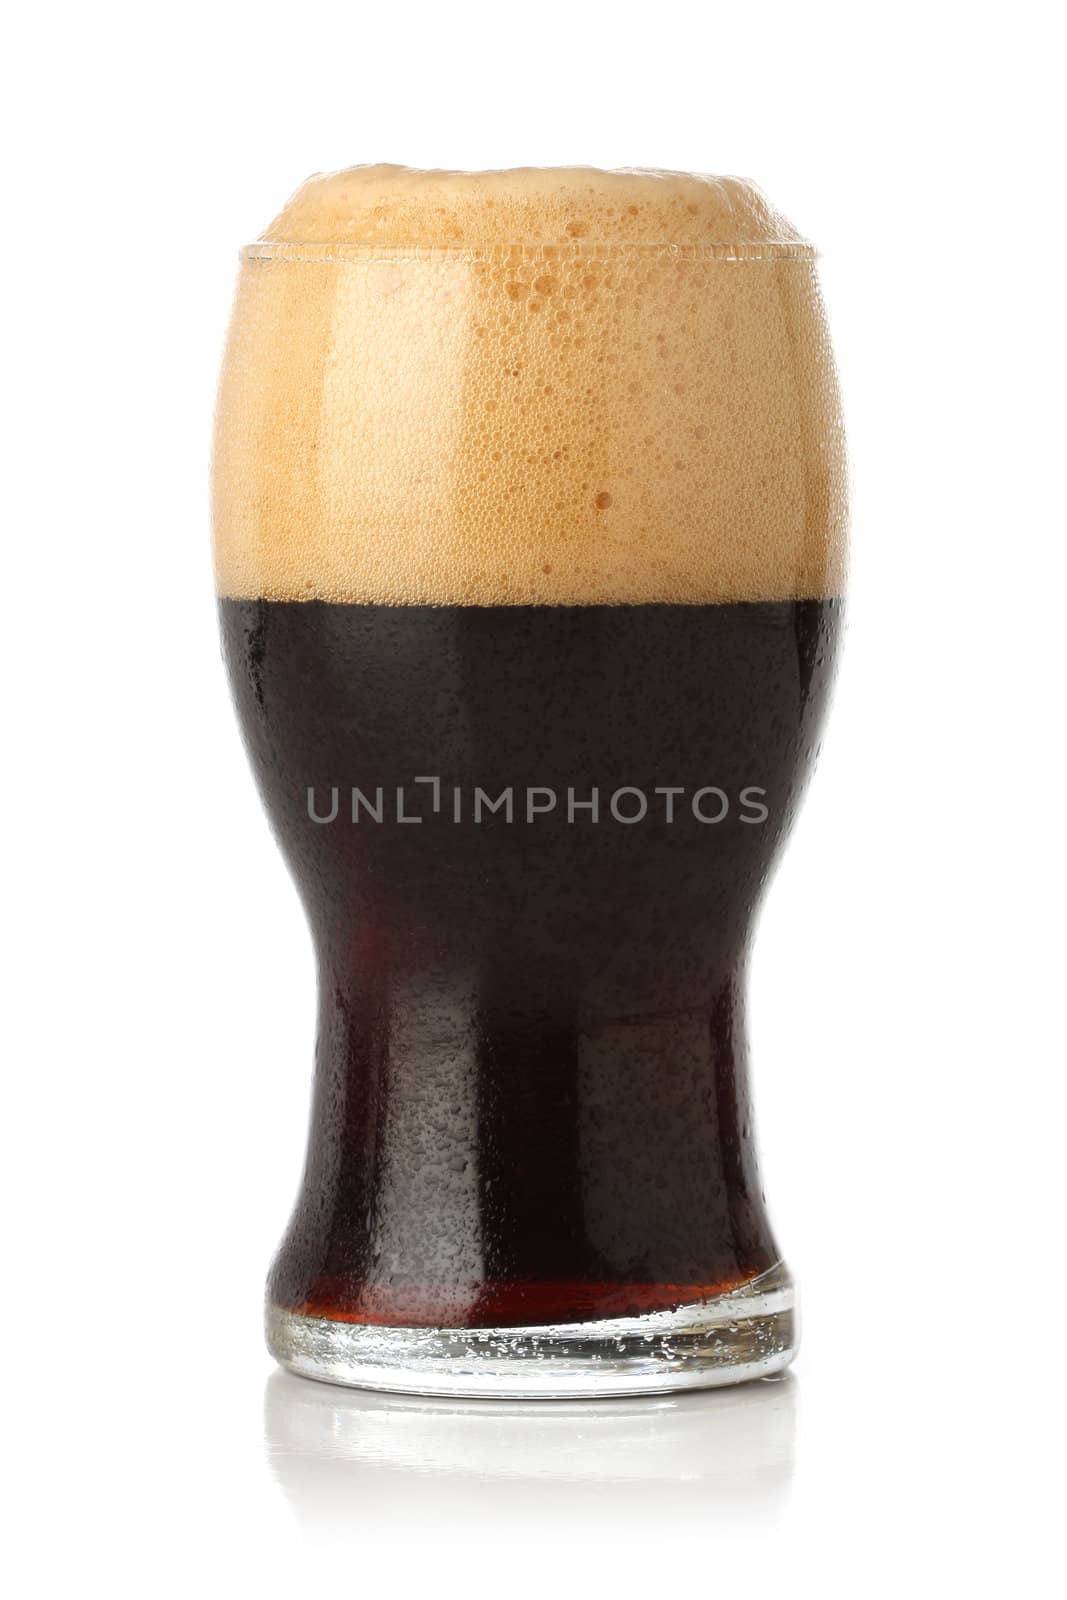 Cold Stout beer glass isolated  by Erdosain